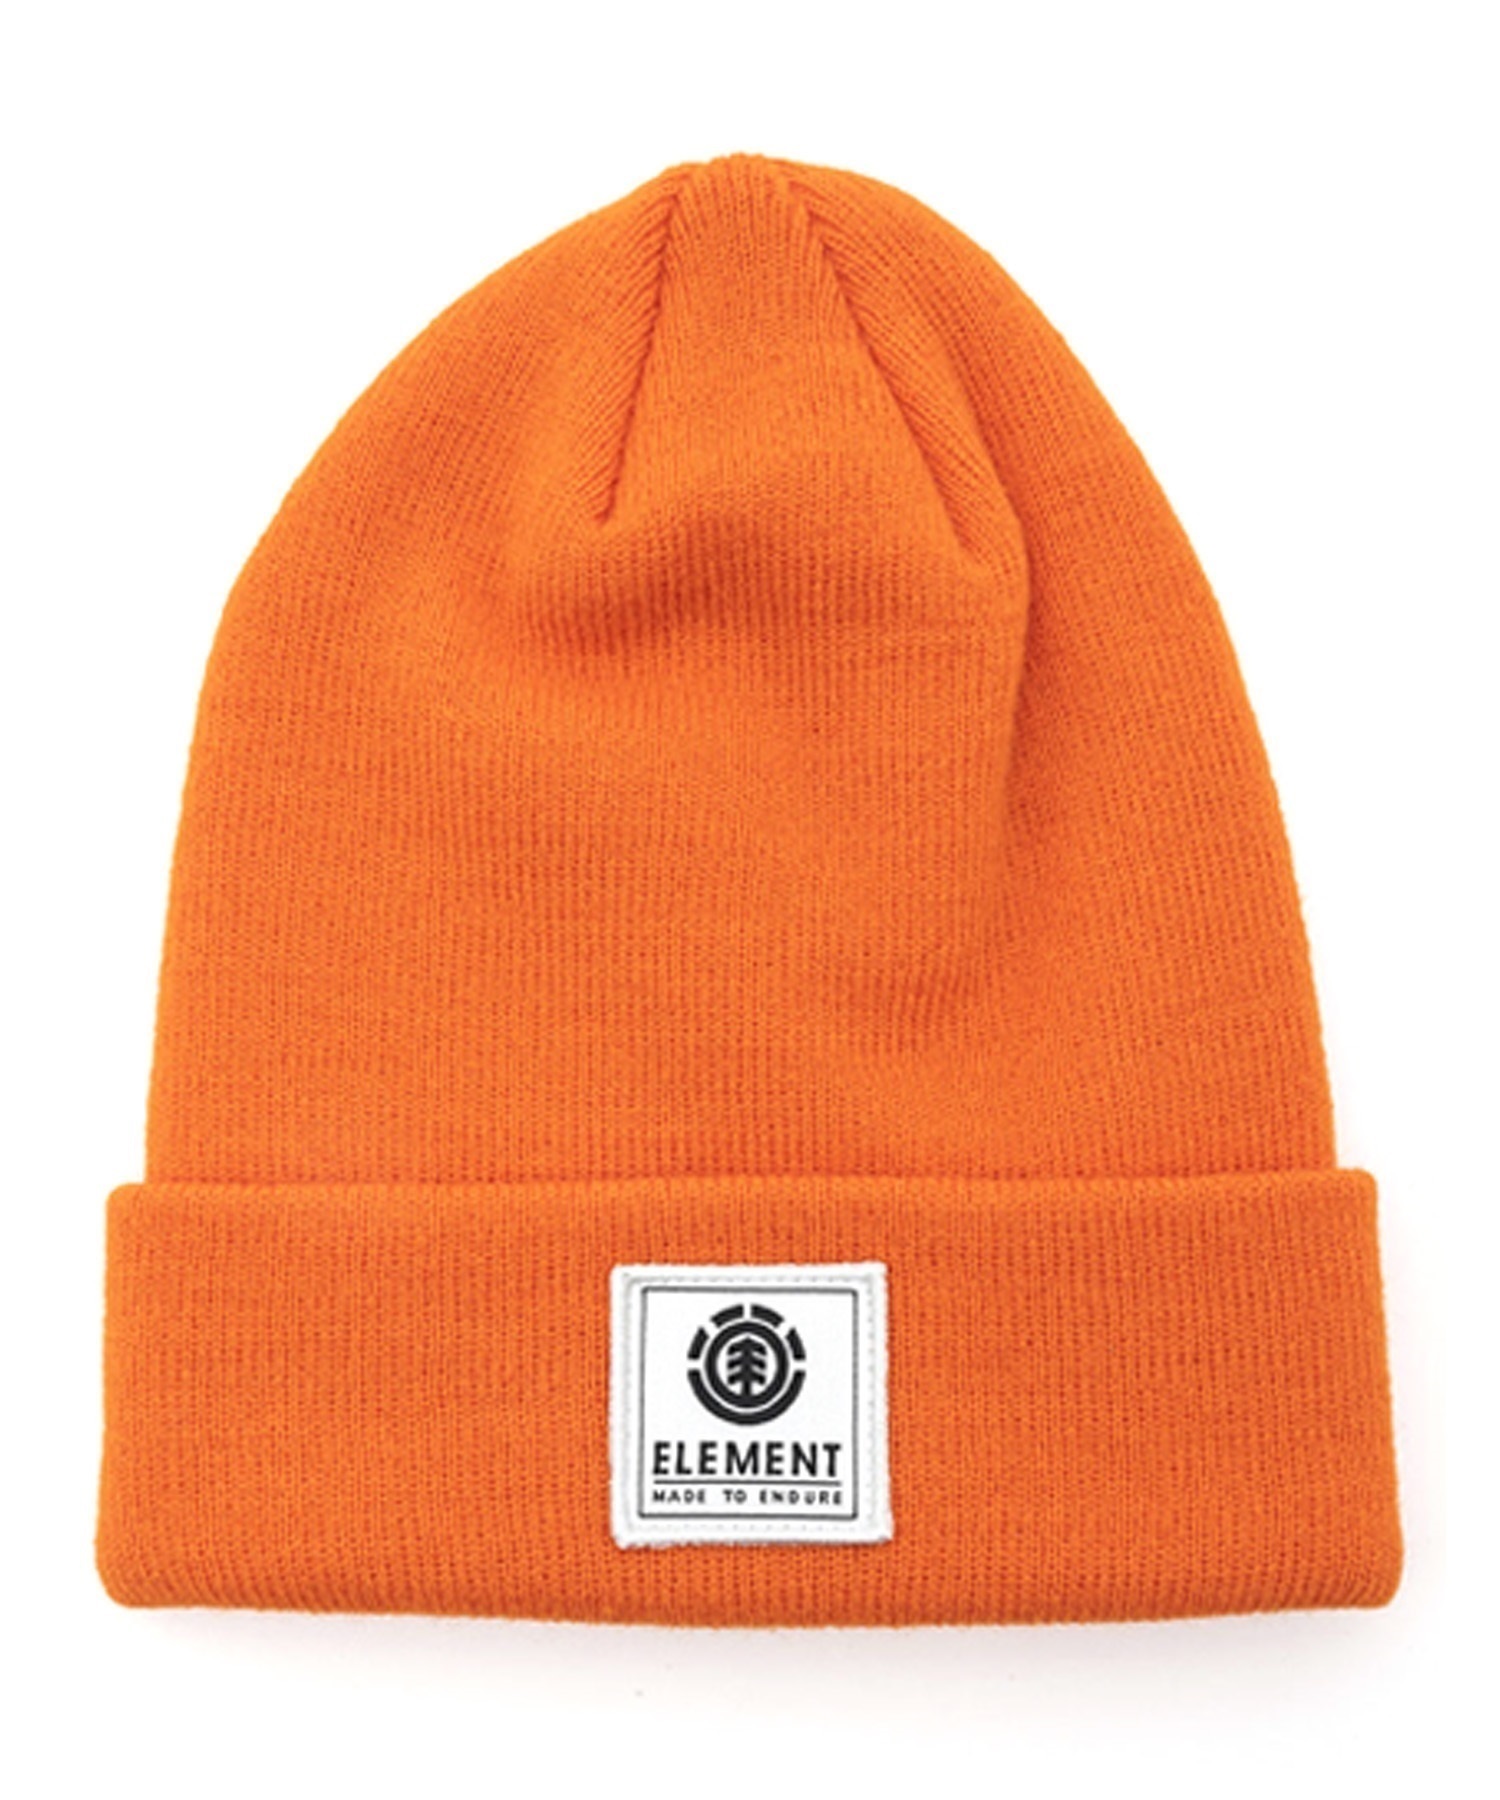 ELEMENT/エレメント 2WAY BOMBING BEANIE YOUTH キッズ ビーニー 